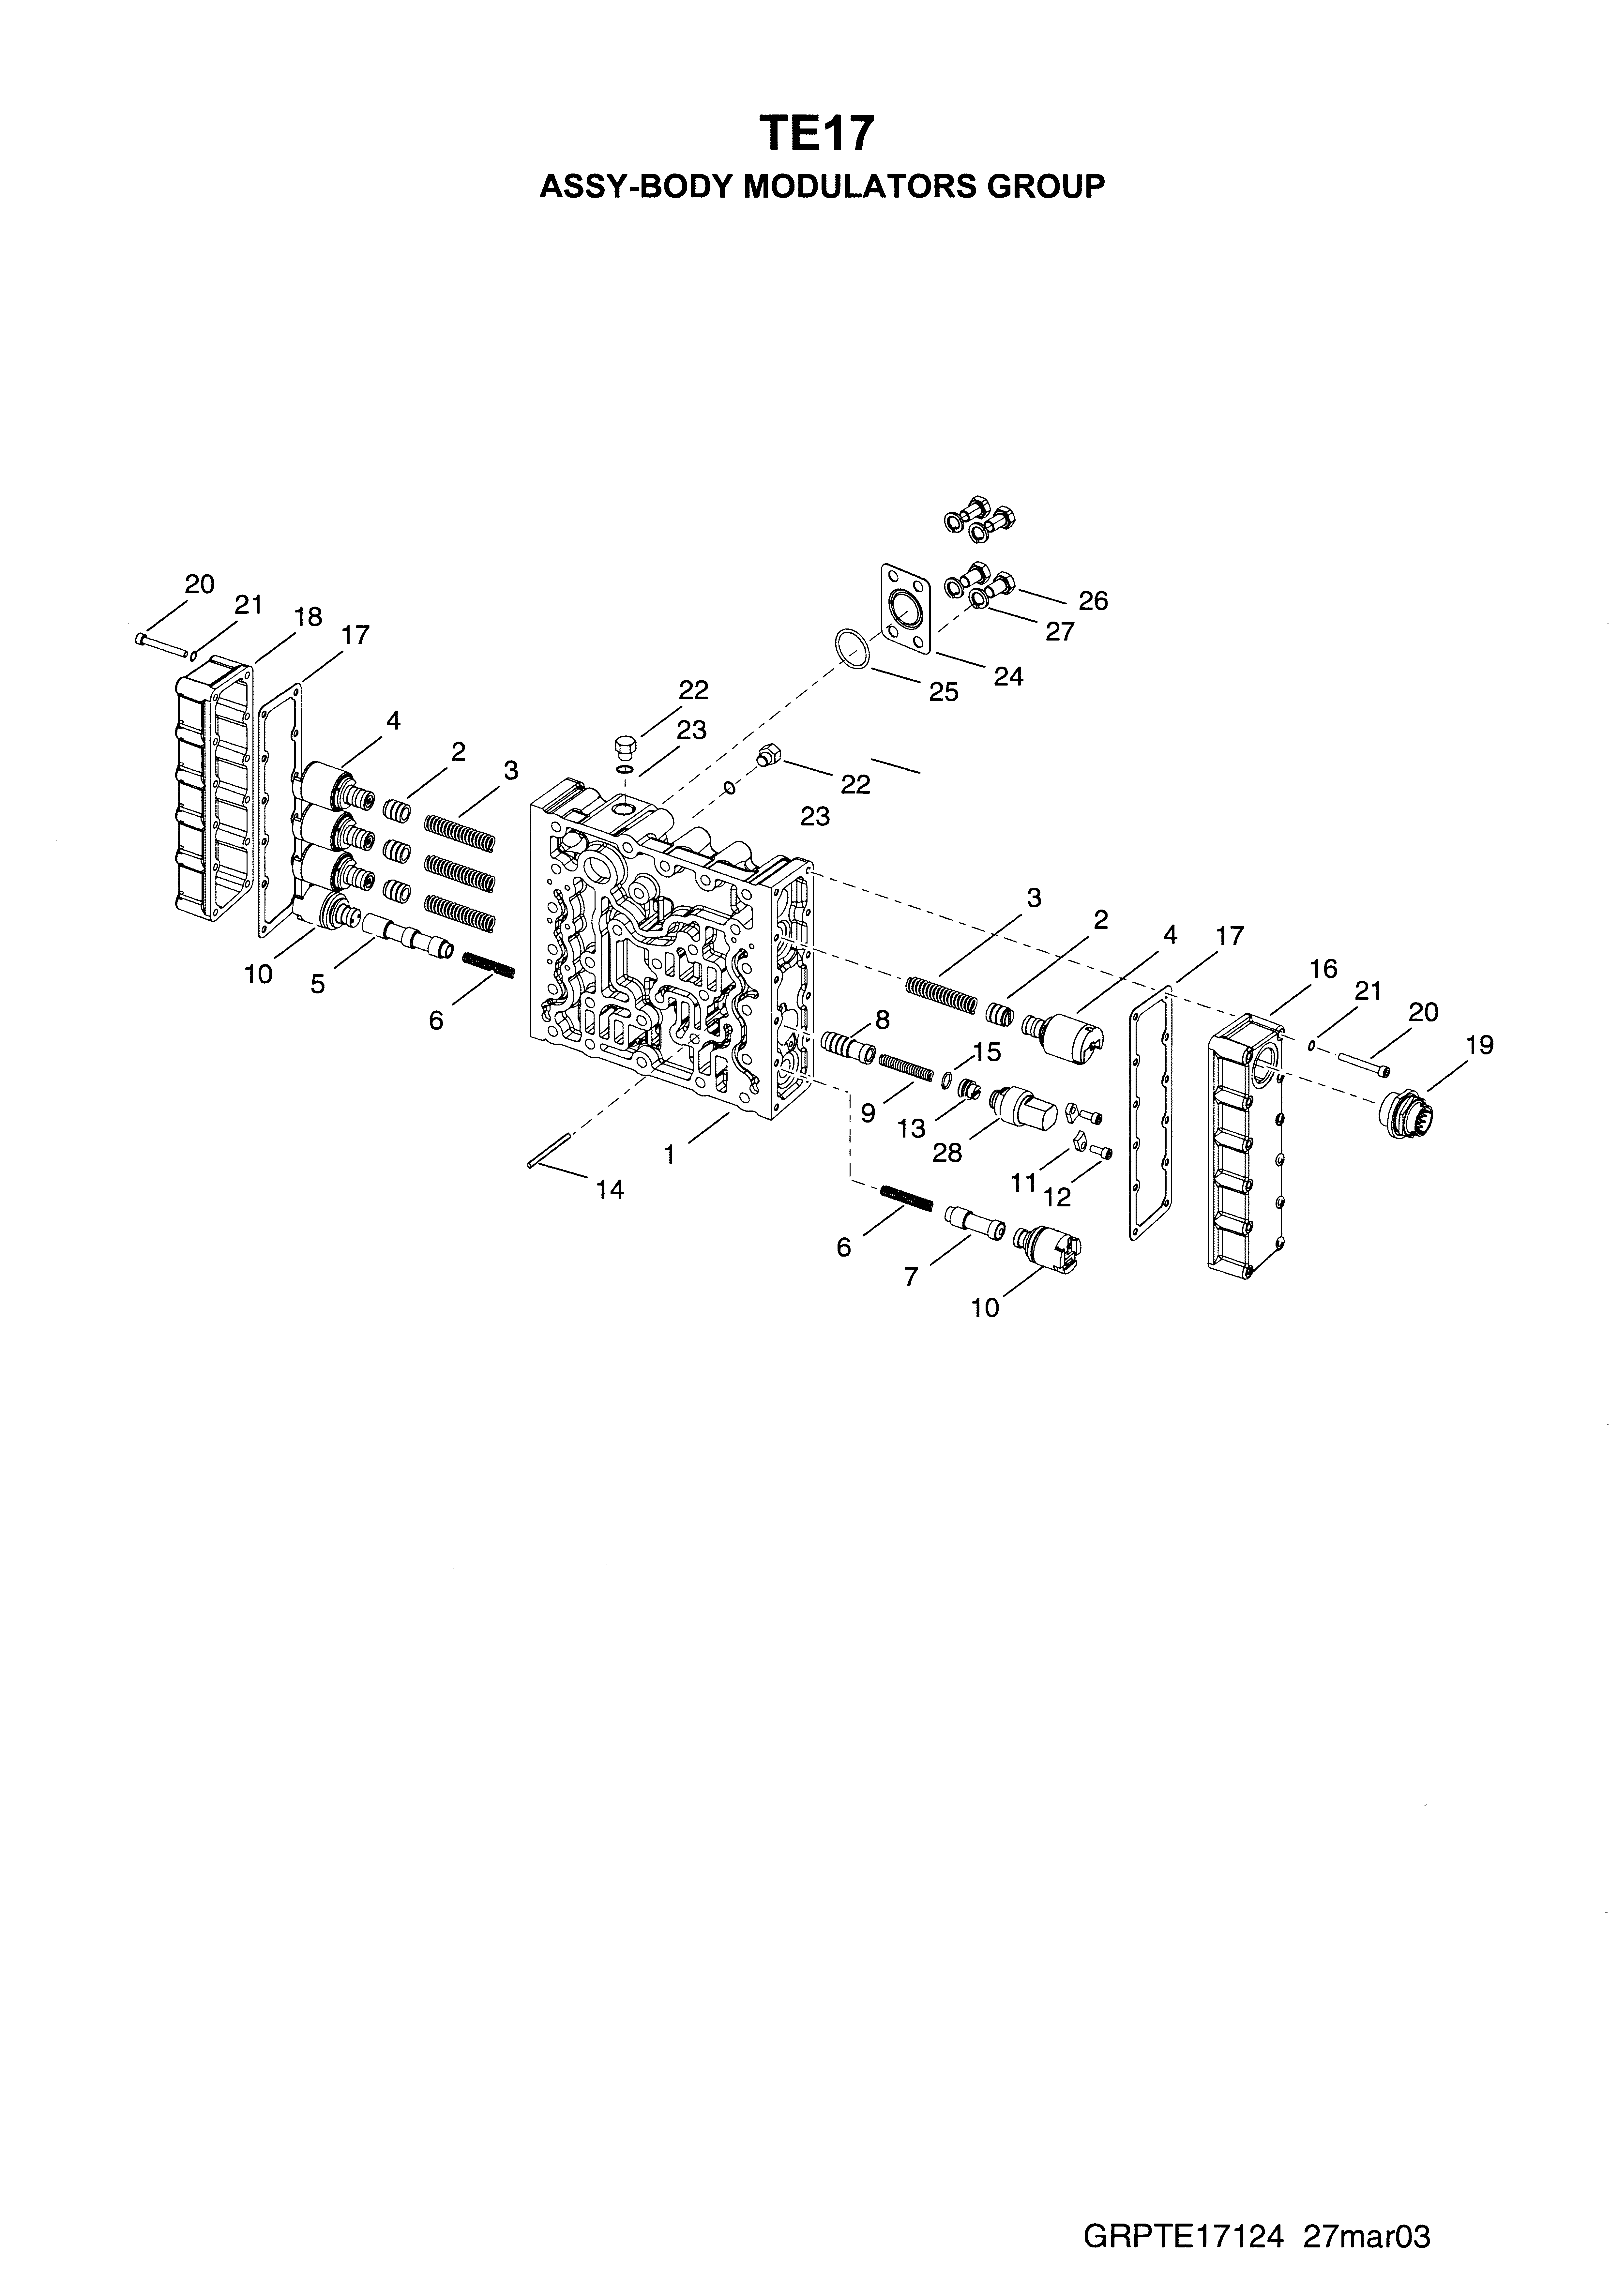 drawing for MI-JACK L0009702003 - ELECTR CONTROLLED MODUL. VALVE (figure 2)